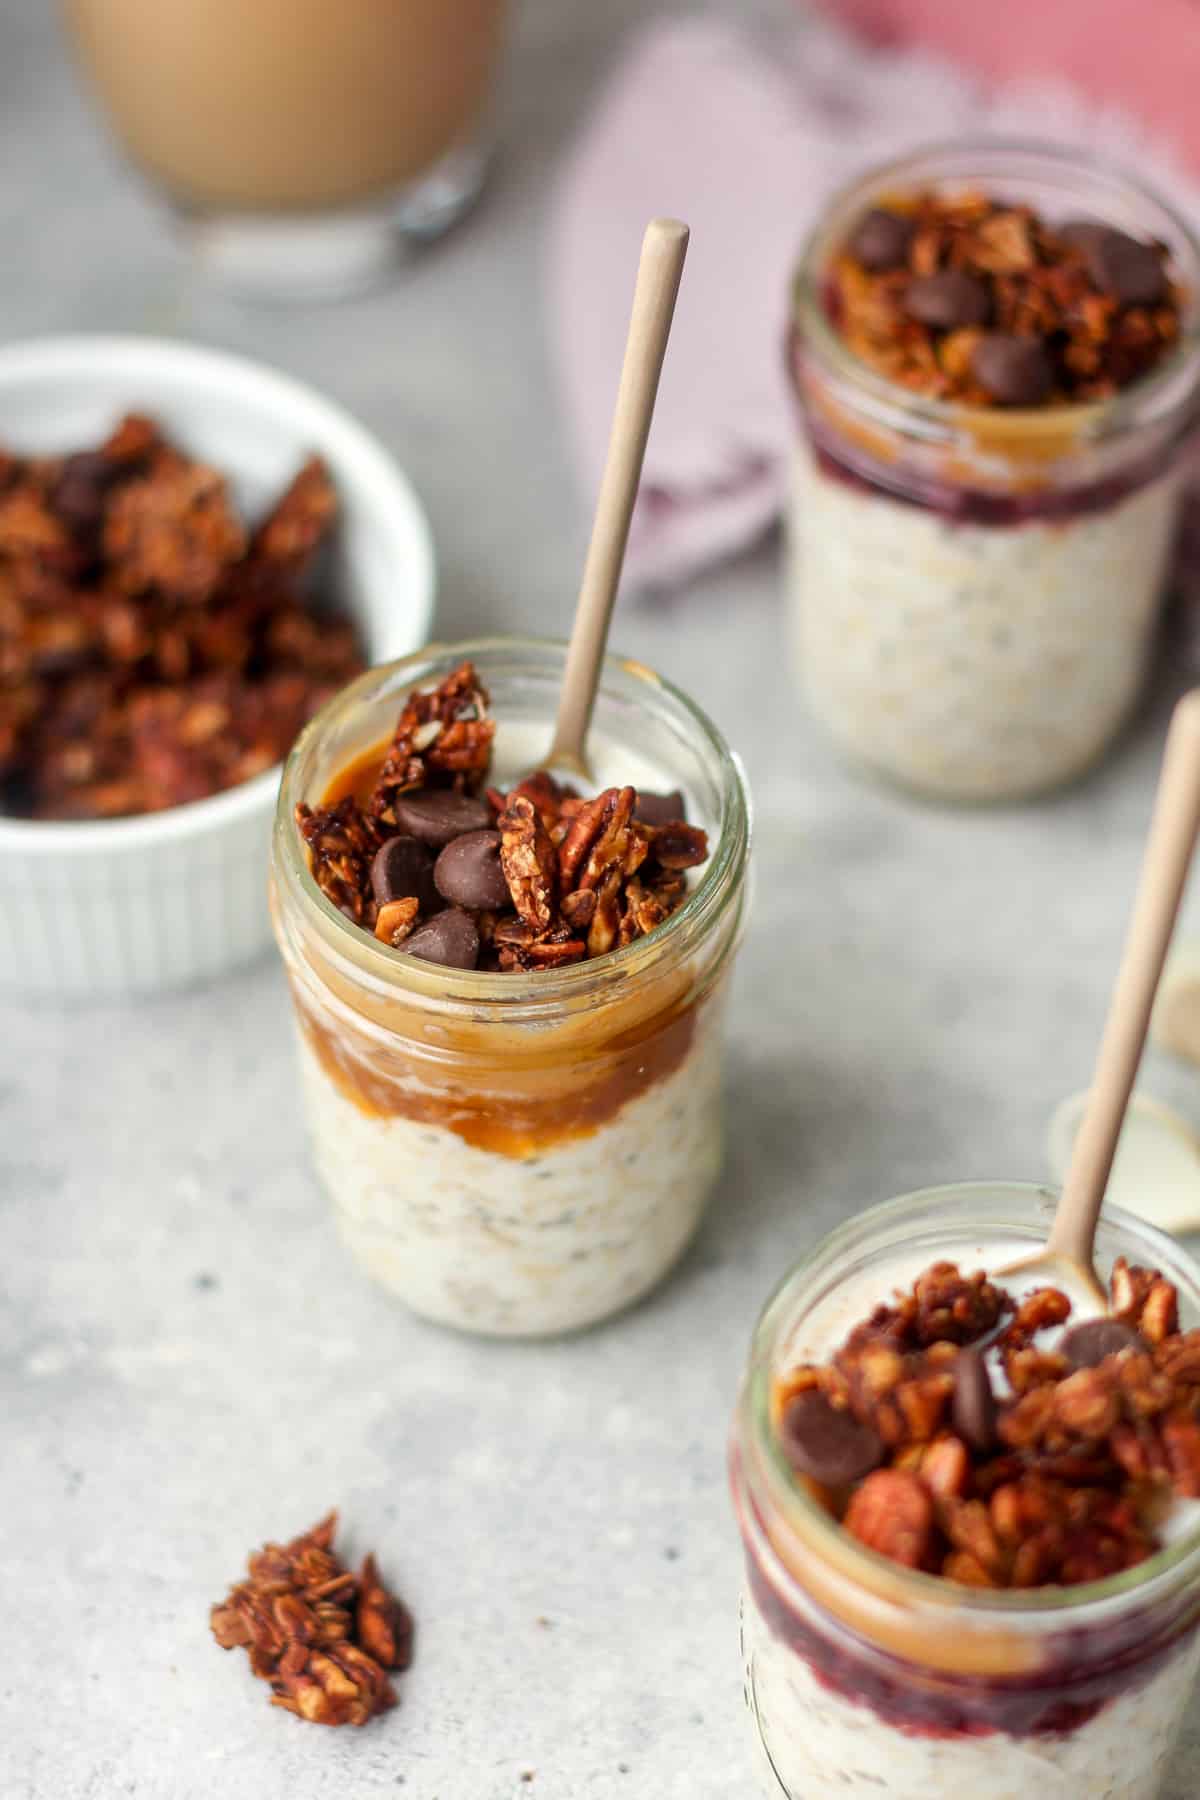 Overhead view of jars of peanut butter and jelly overnight oats with granola on top.